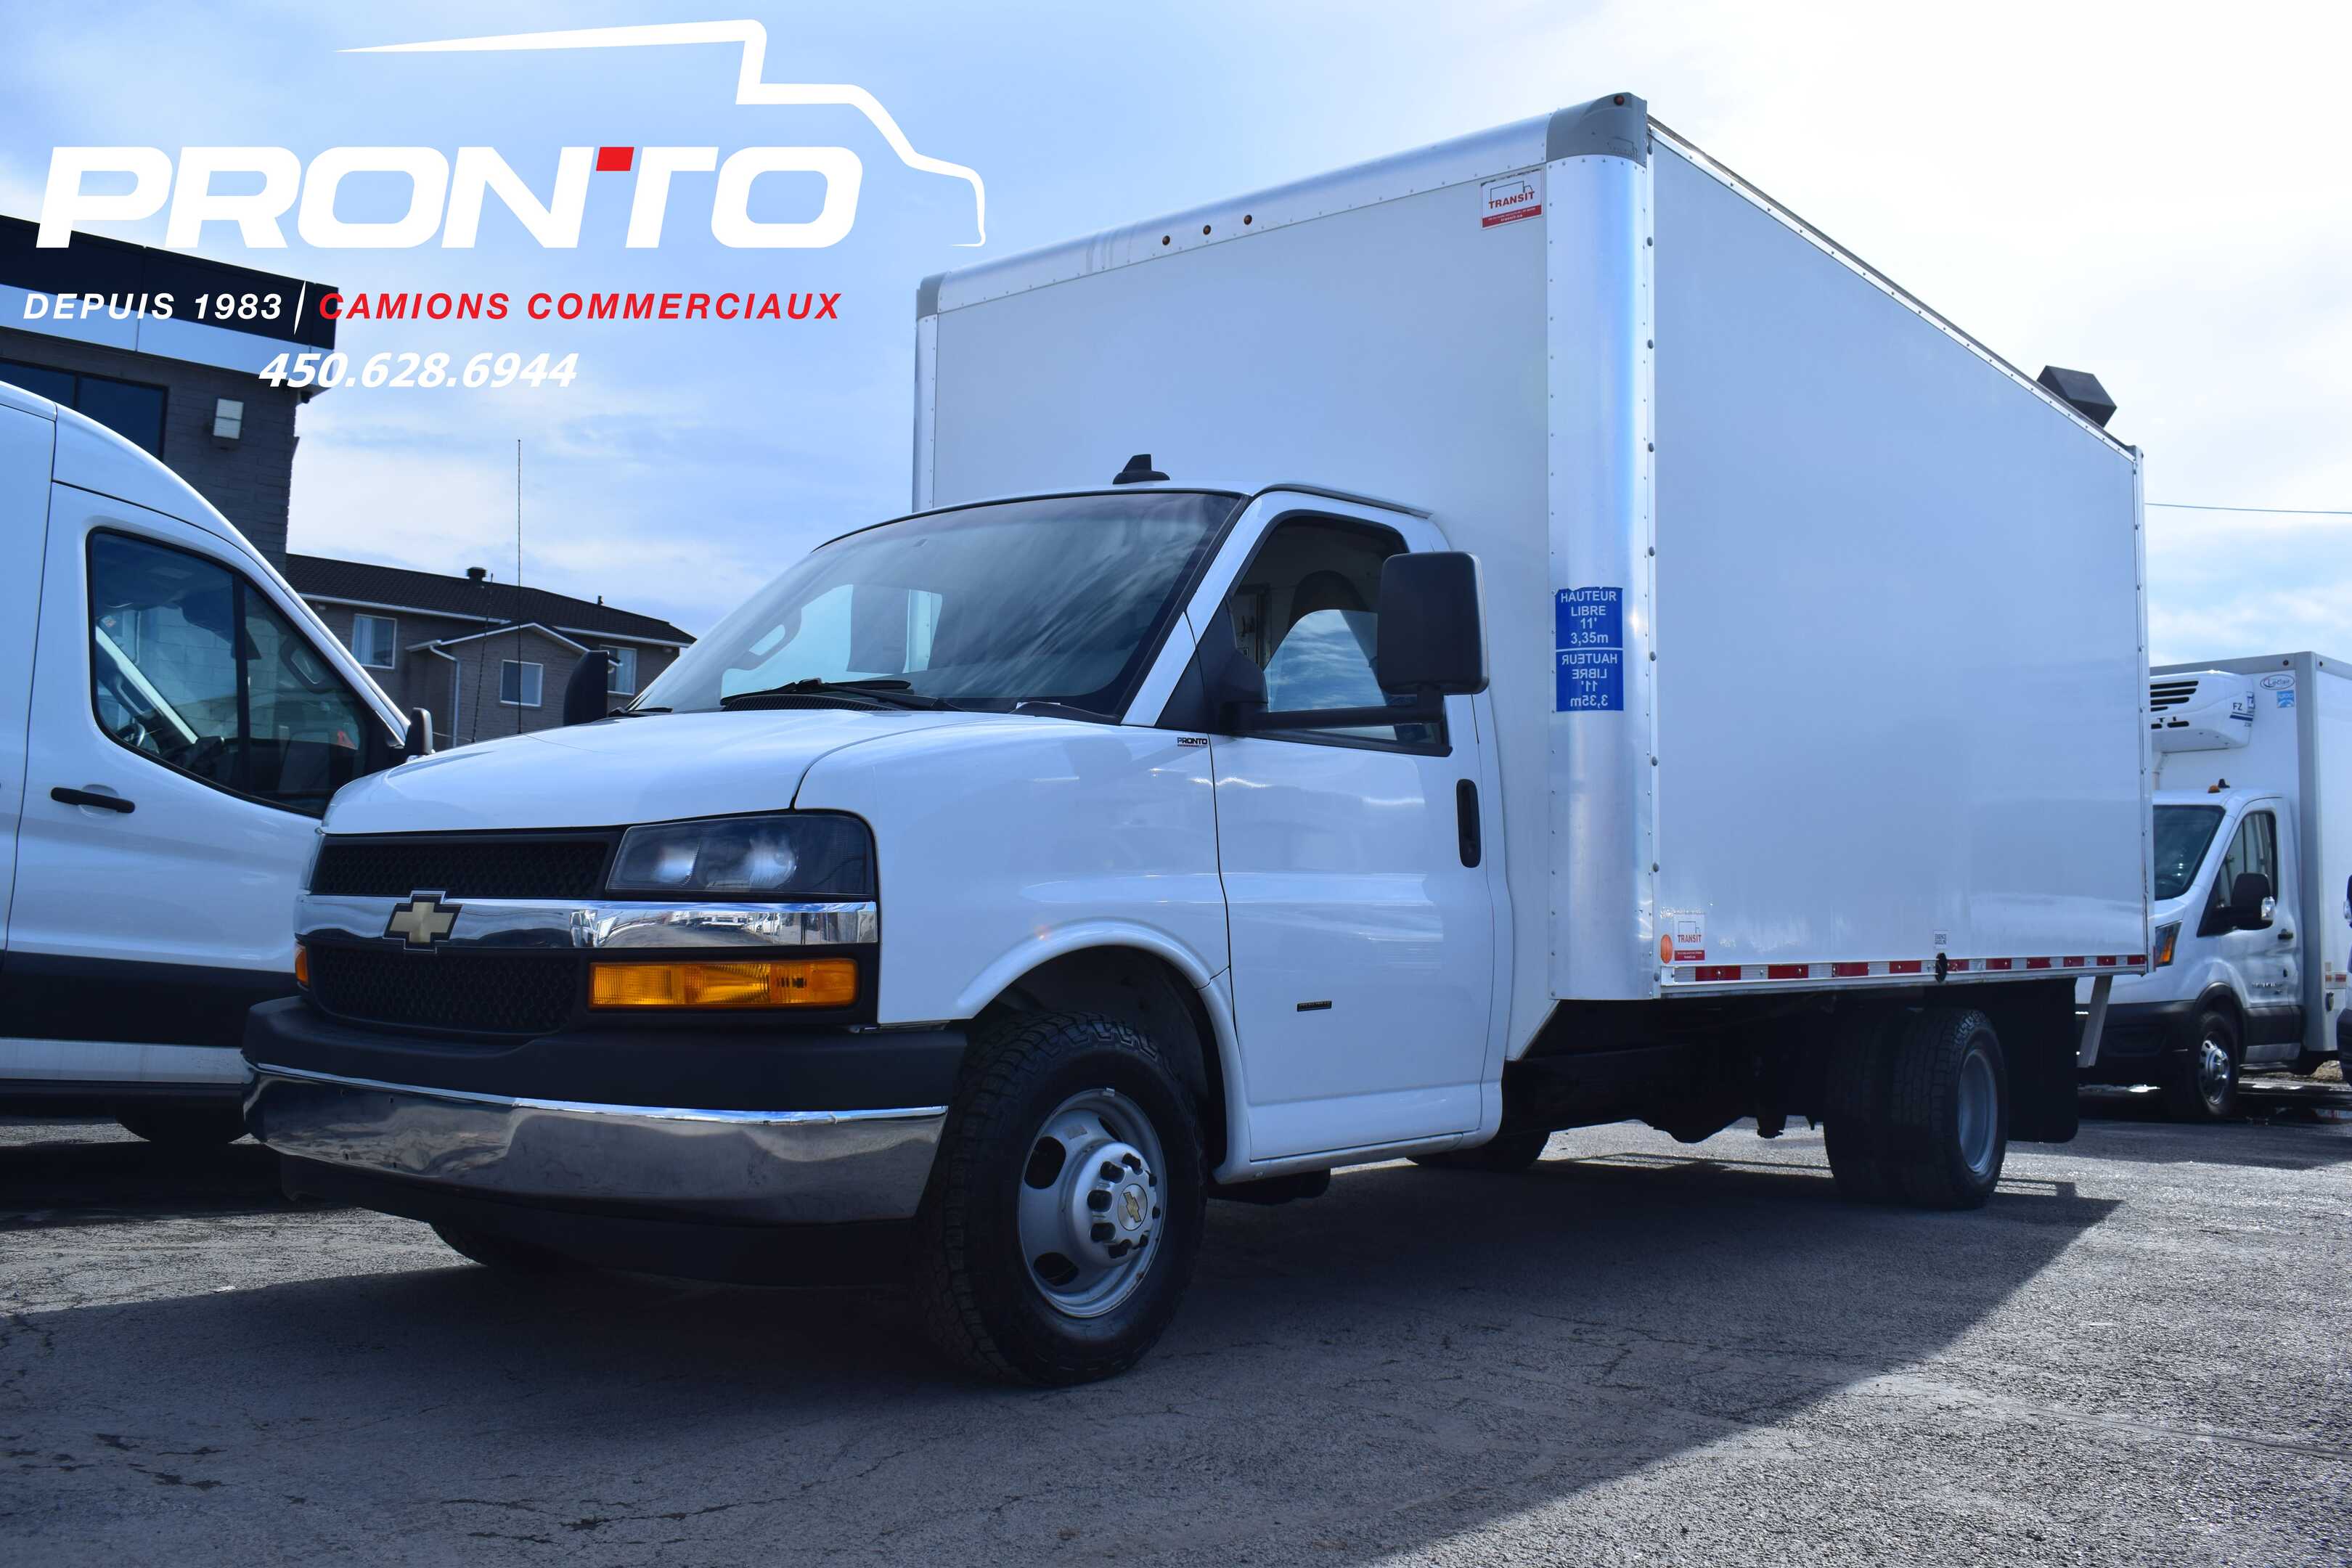 2019 Chevrolet Express 3500 3500 ** Cube 16 pieds Boite Extra Large !! ** 